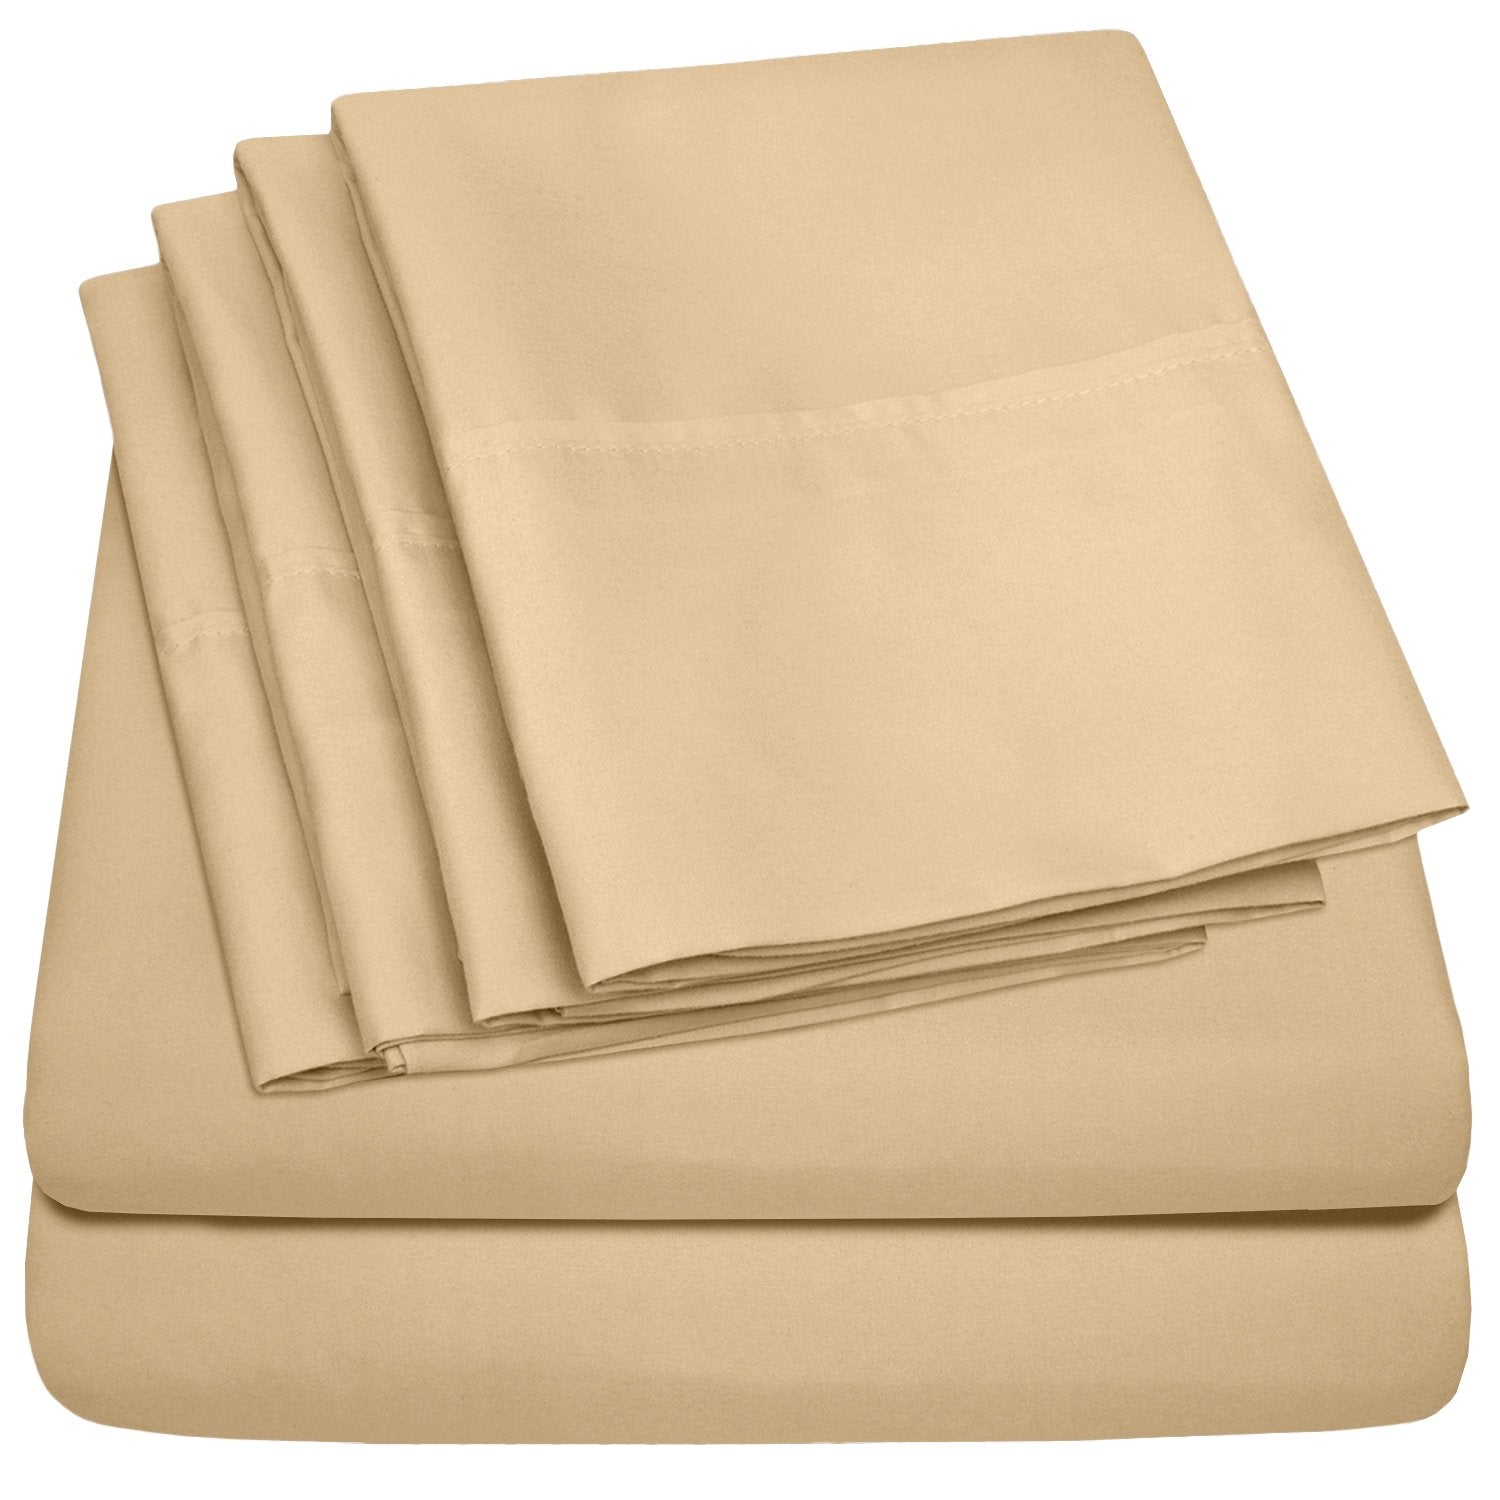 Deluxe 6-Piece Bed Sheet Set (Camel) - Folded